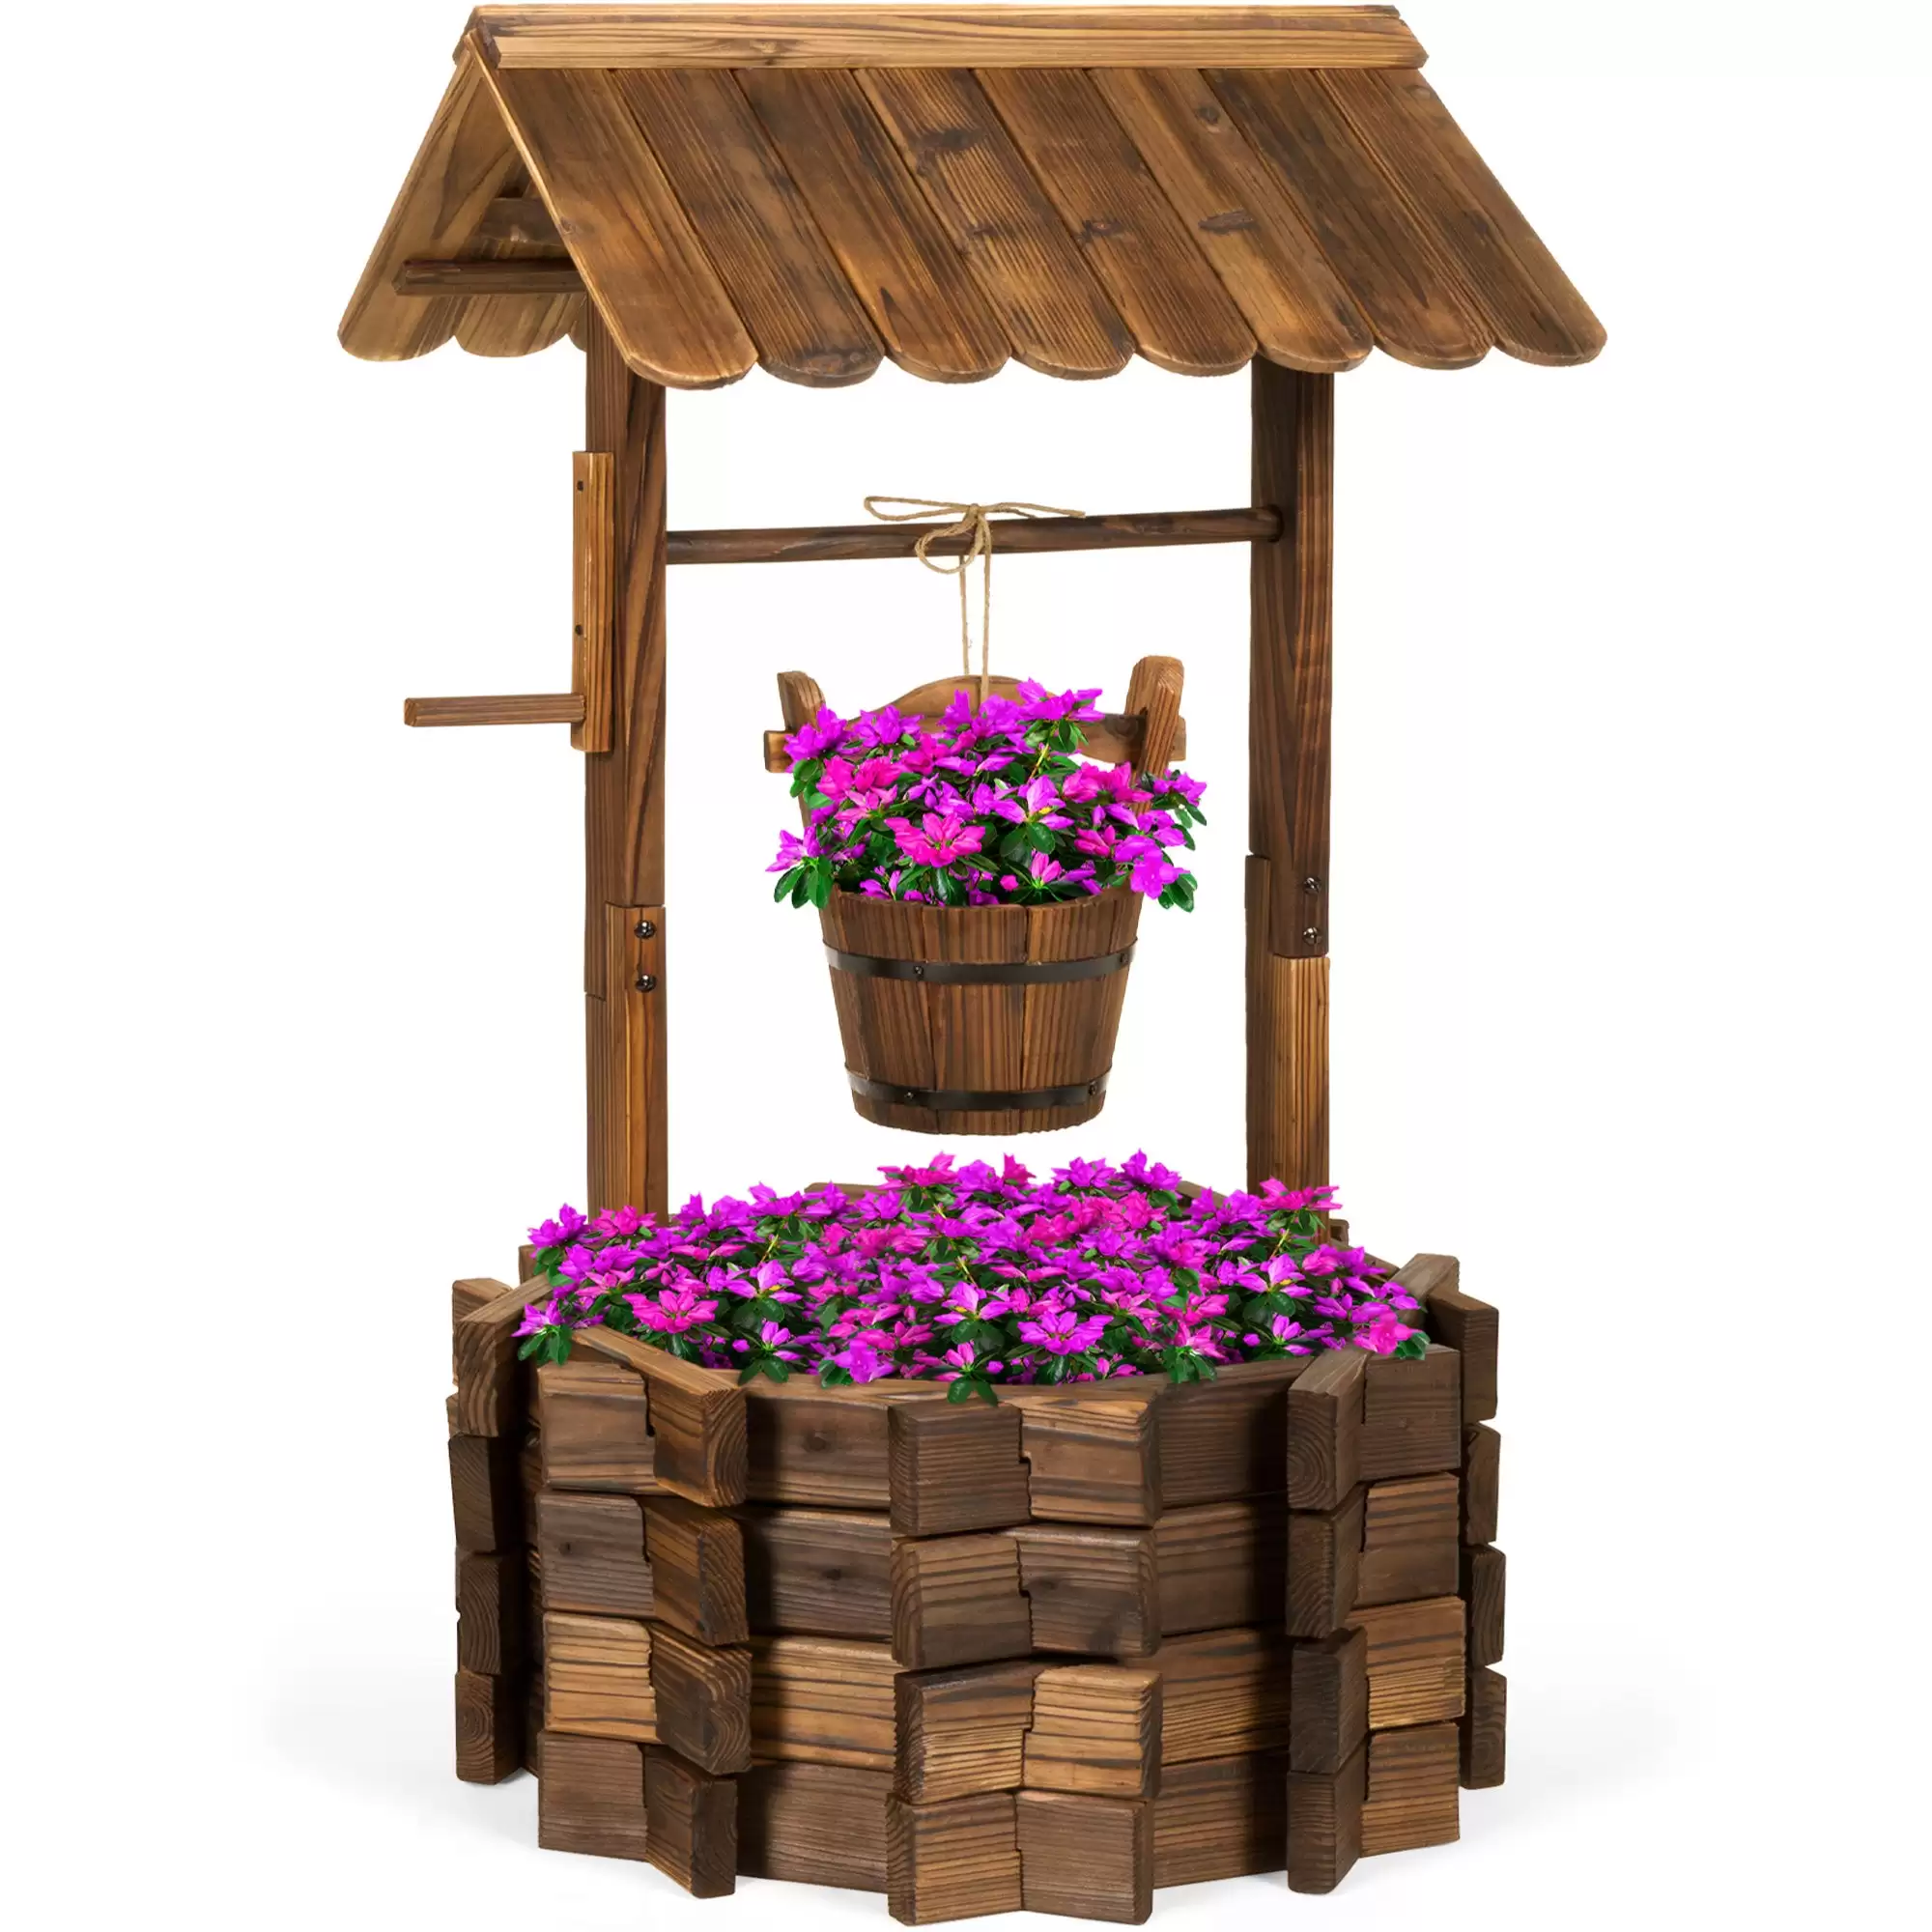 Order In Just $89.99 Rustic Wooden Wishing Well Planter Yard Decoration W/ Hanging Bucket With This Bestchoiceproducts Discount Voucher